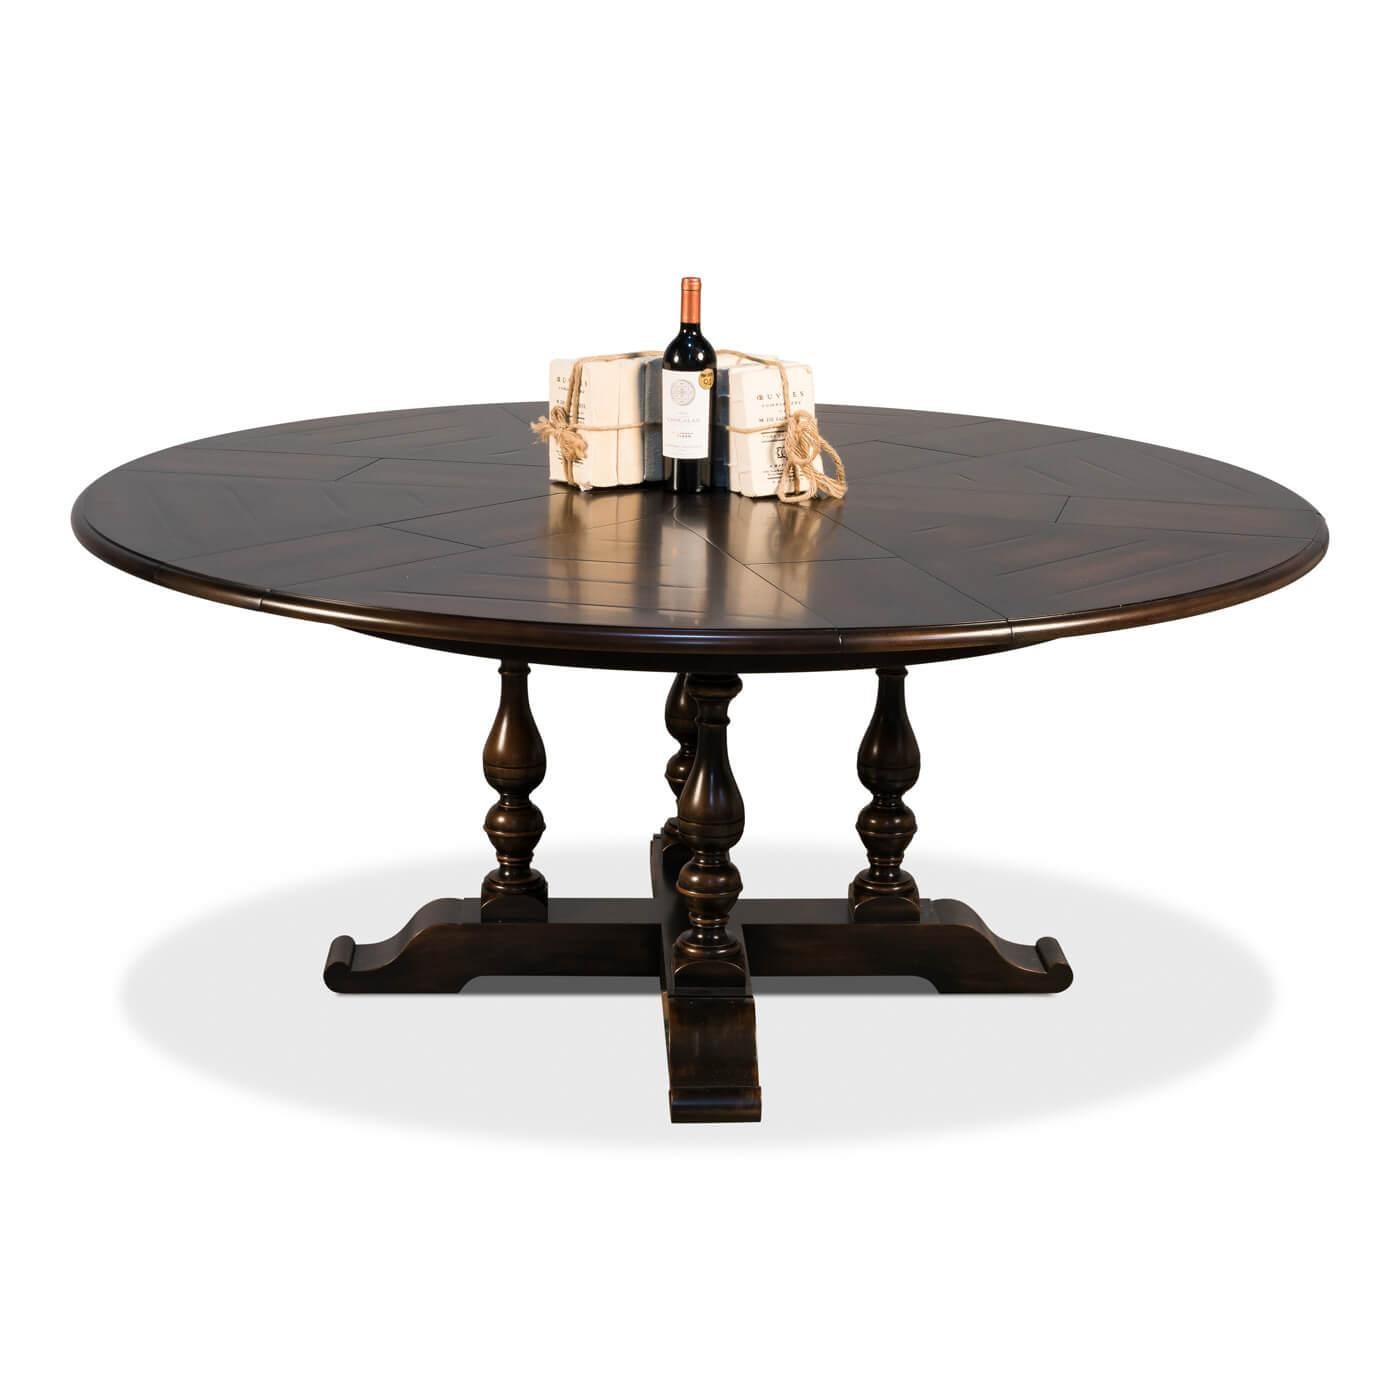 English Style Round Extension Dining Table, Ebony Finish In New Condition For Sale In Westwood, NJ